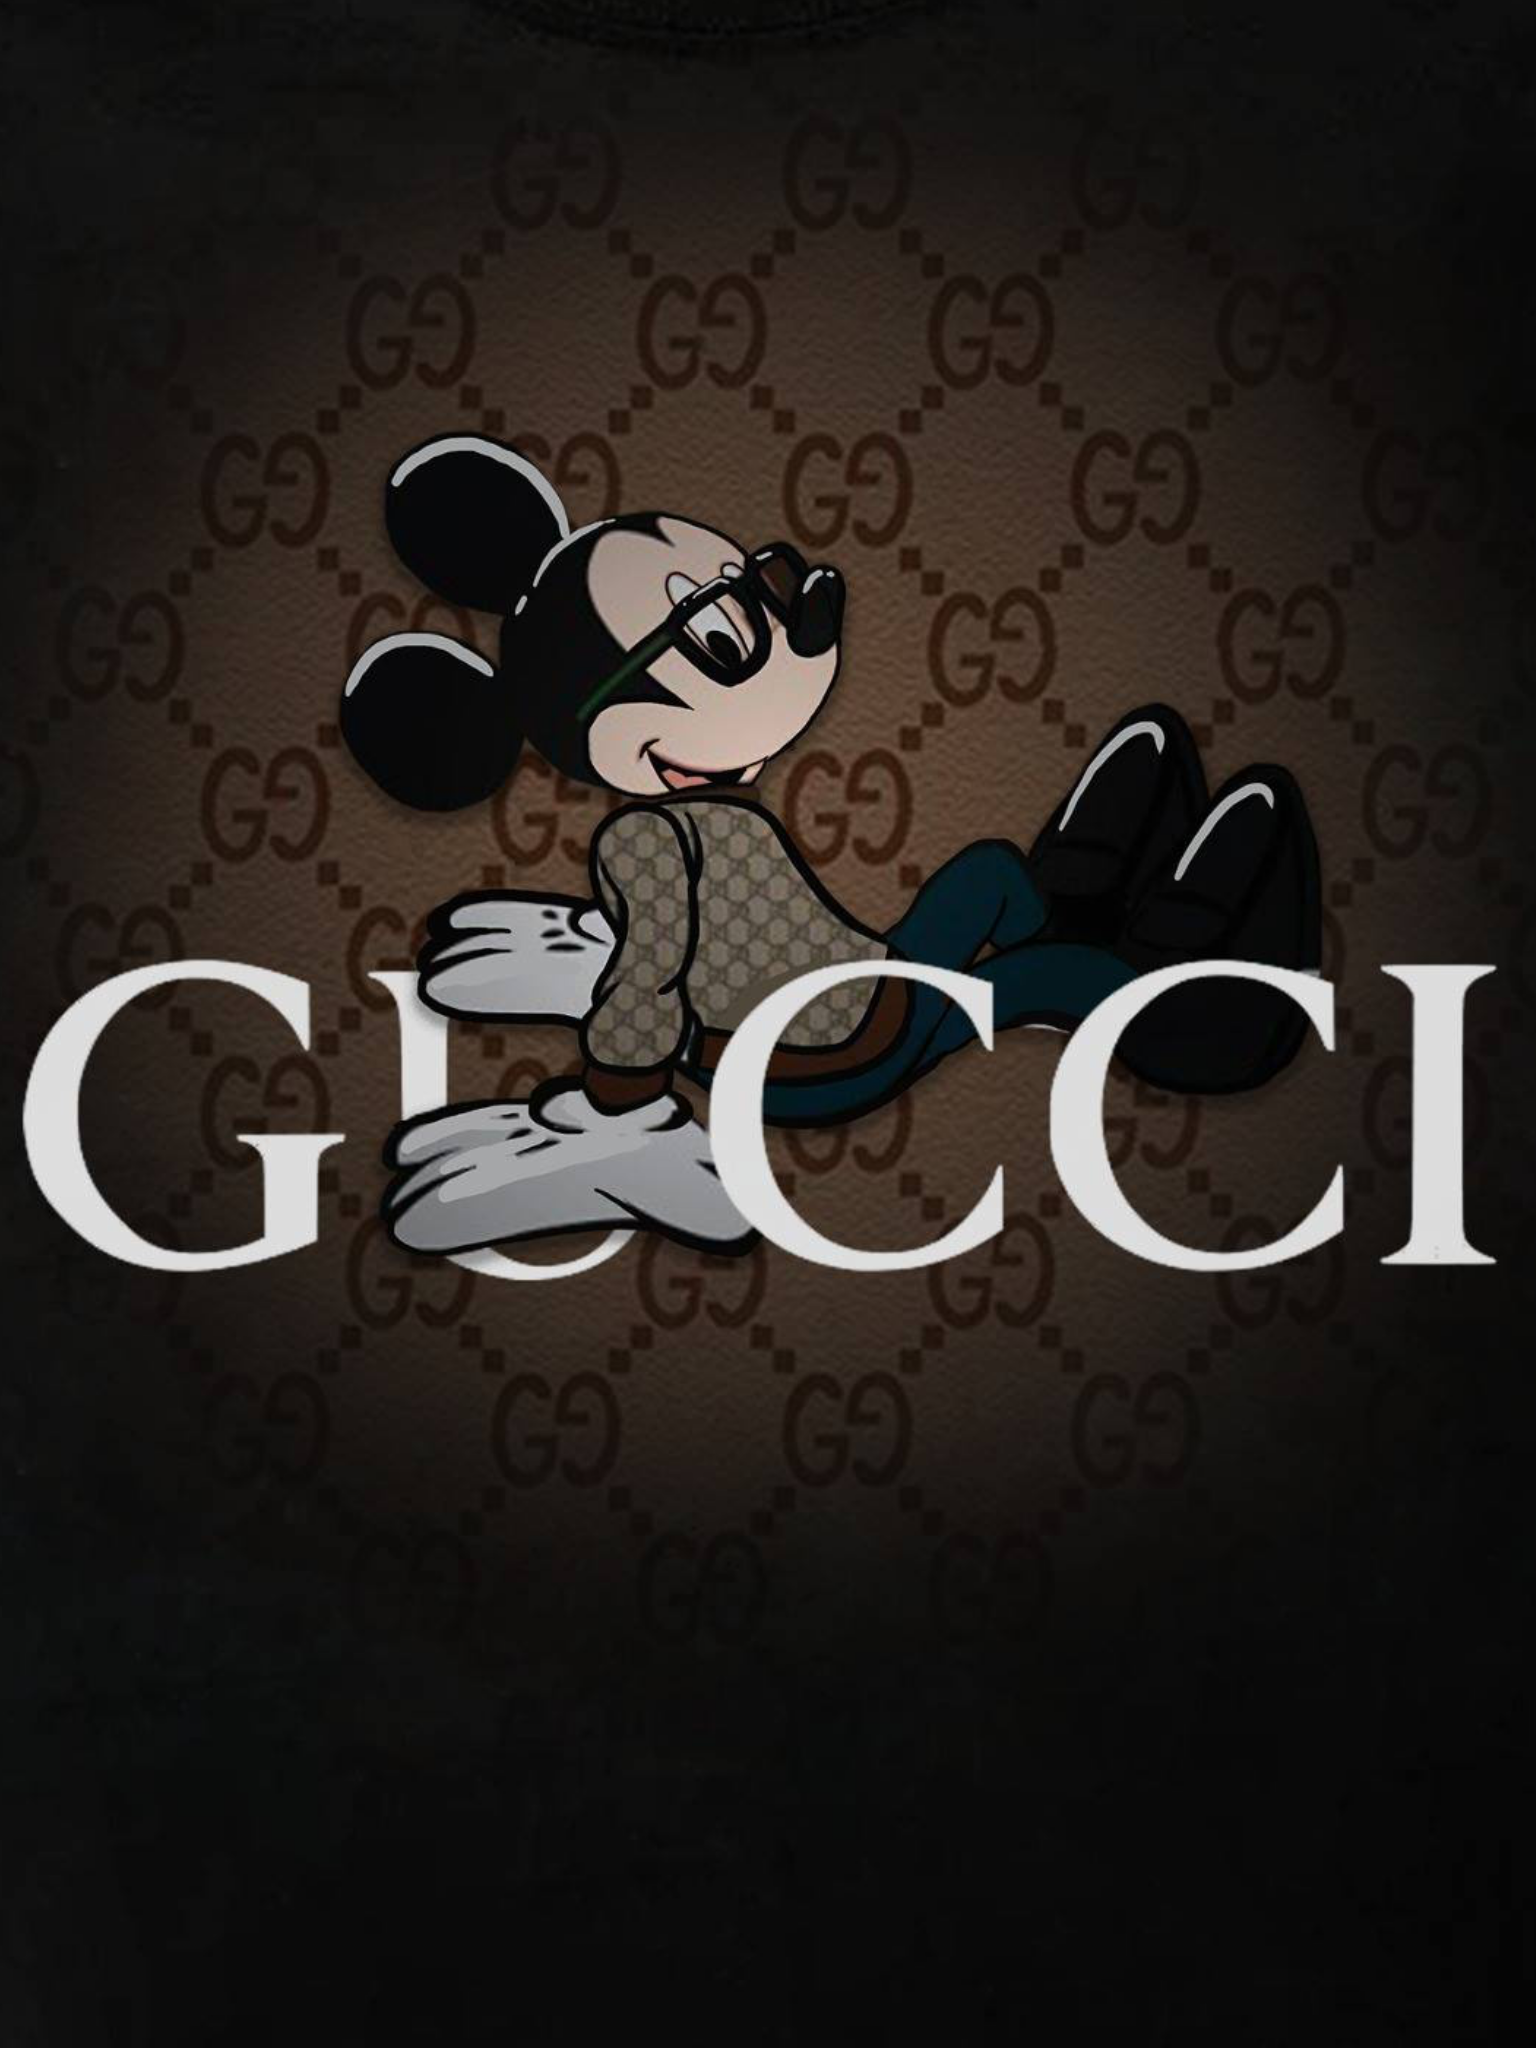 LV Mickey Mouse Png, Louis Vuitton Logo Png, Minnie Png, Dis